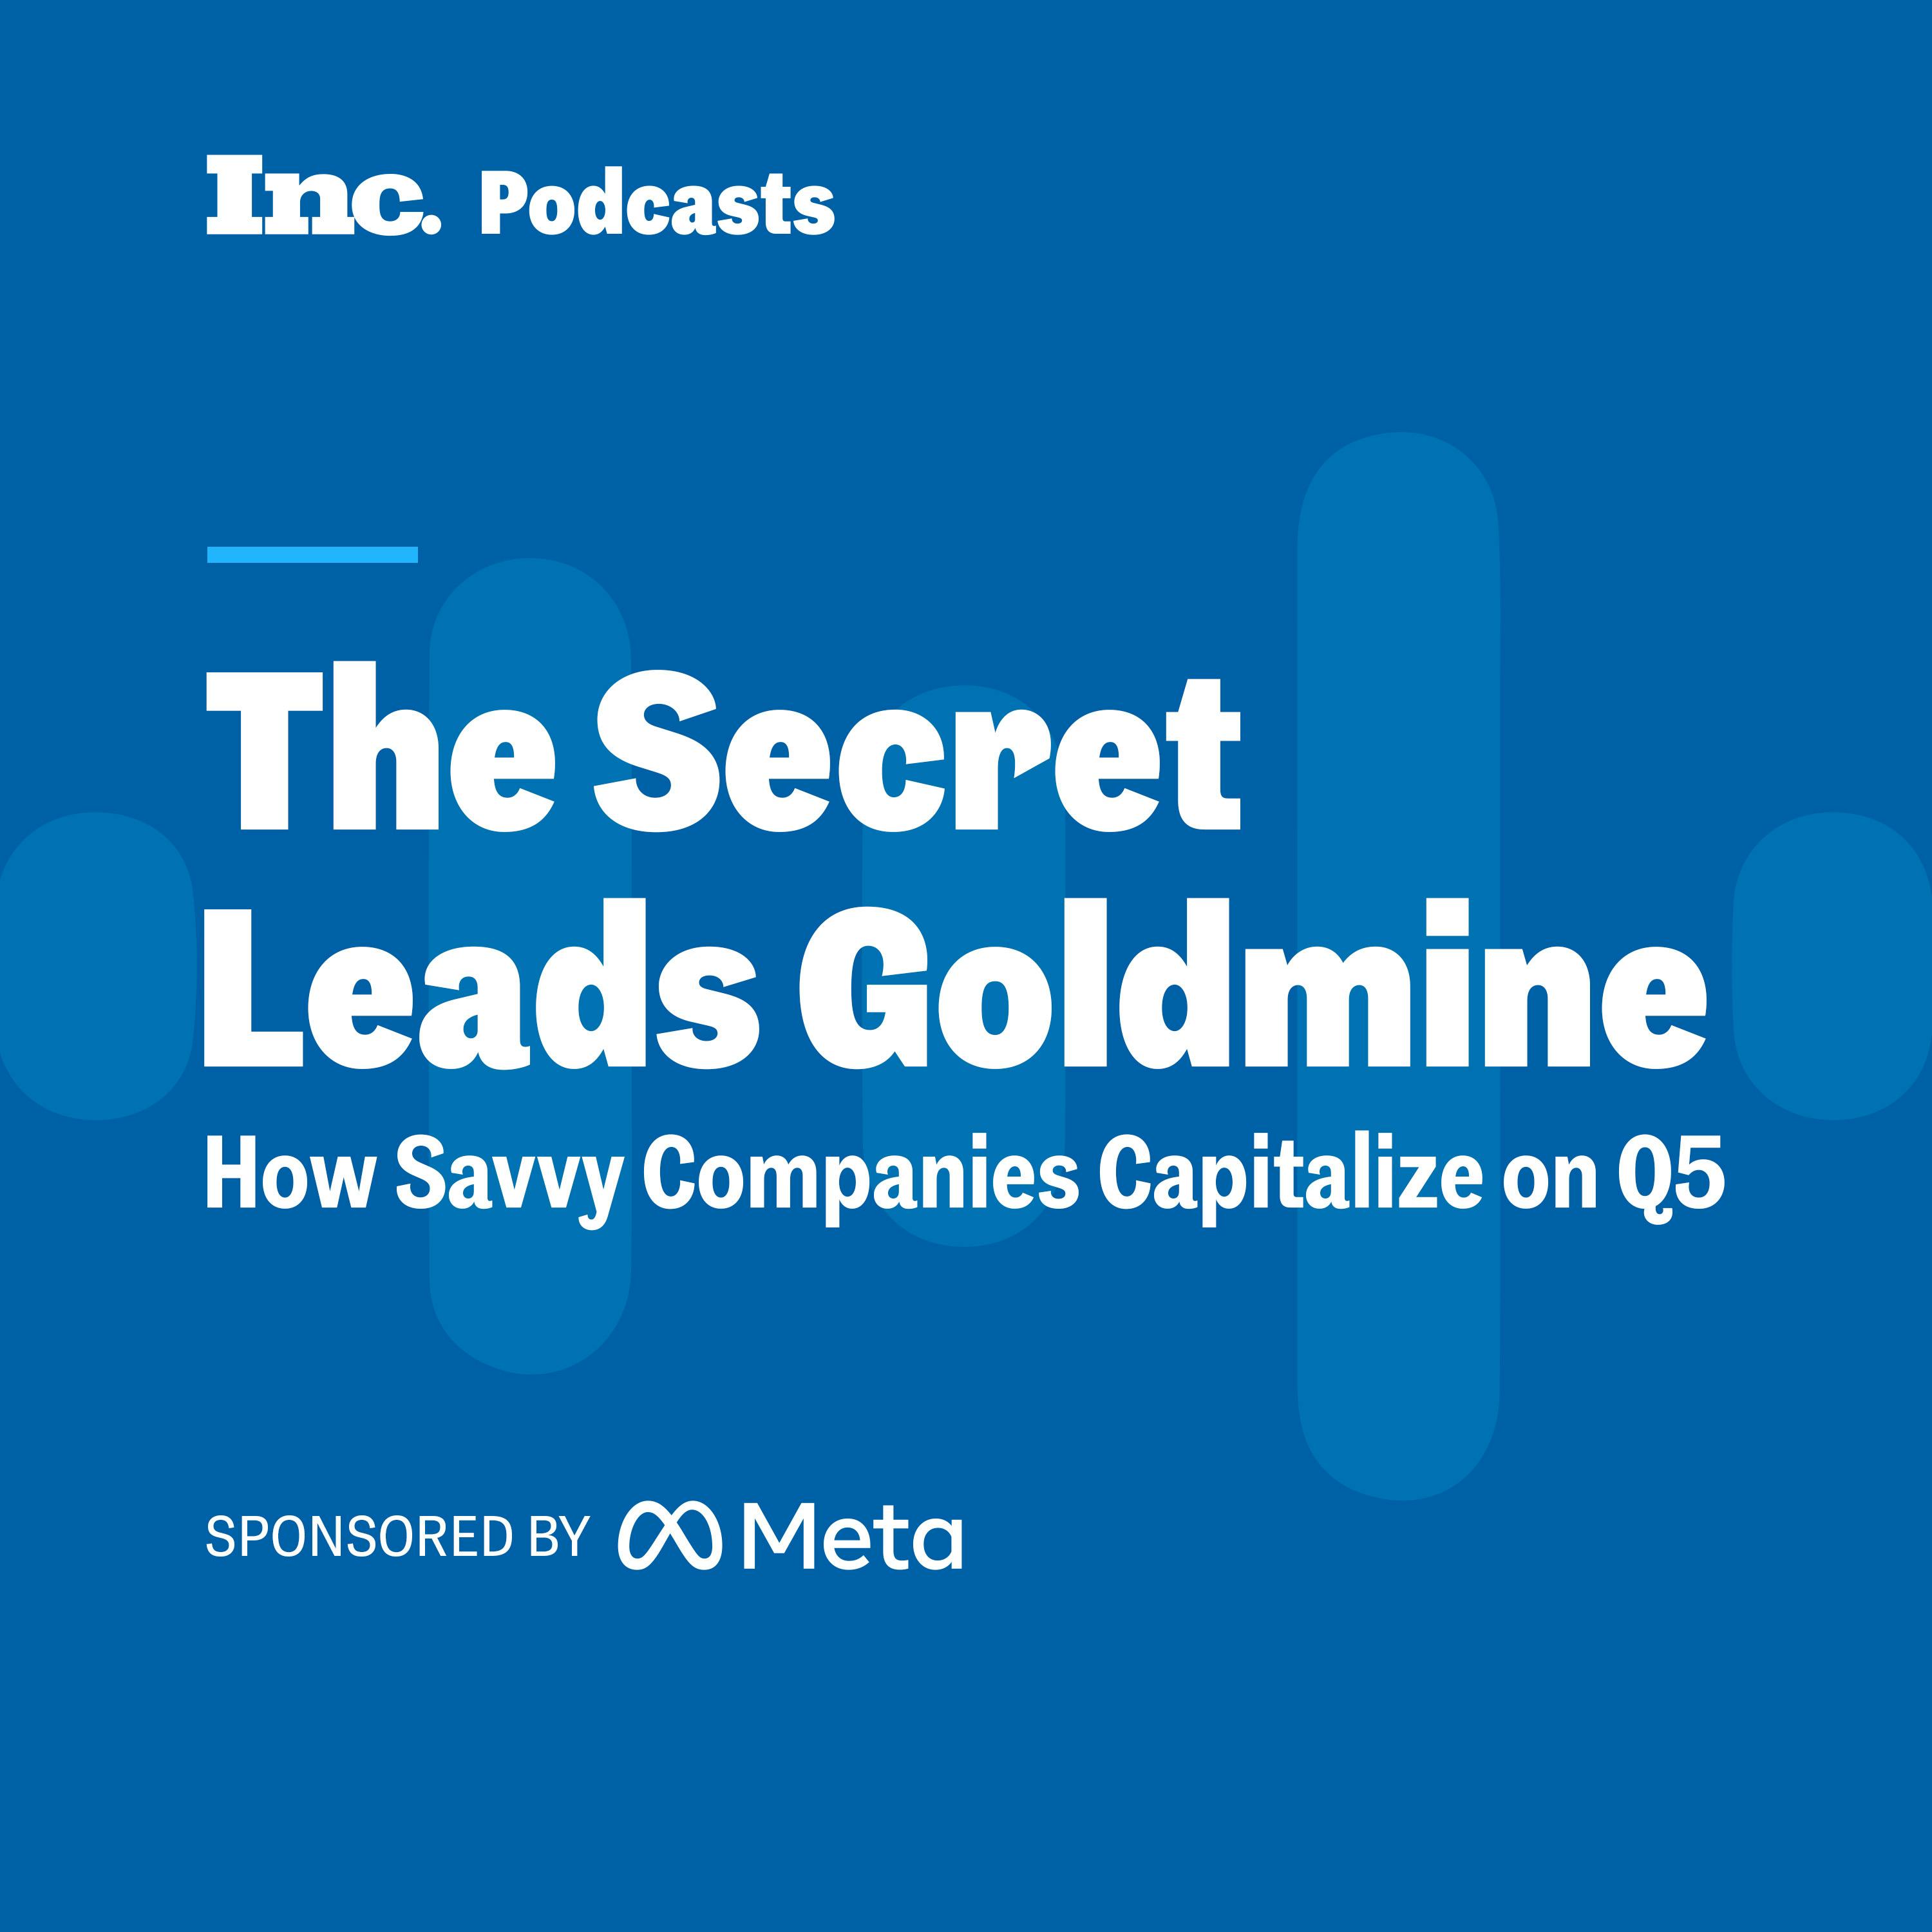 The Secret Leads Goldmine: How Savvy Companies Capitalize on Q5 - FROM INC STUDIO AND META